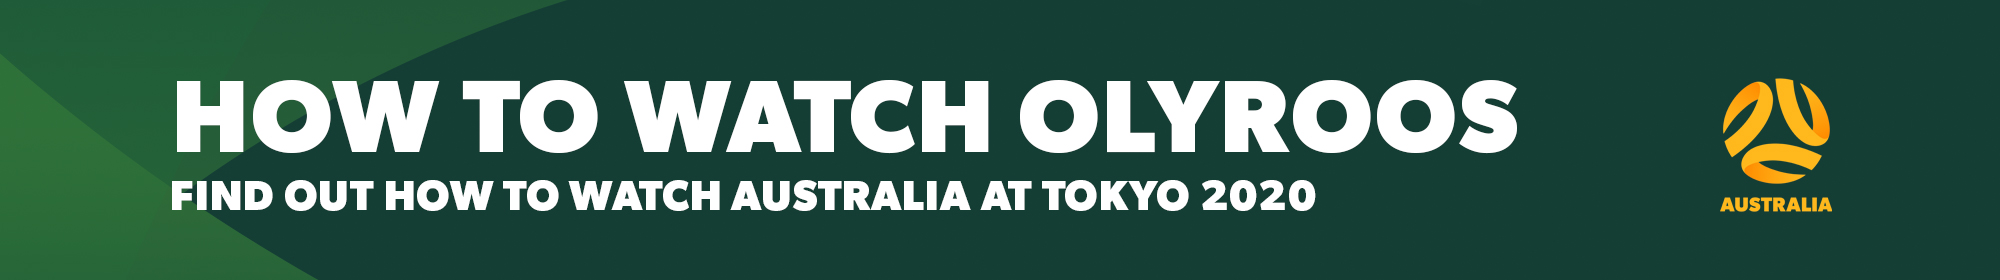 How To Watch Olyroos